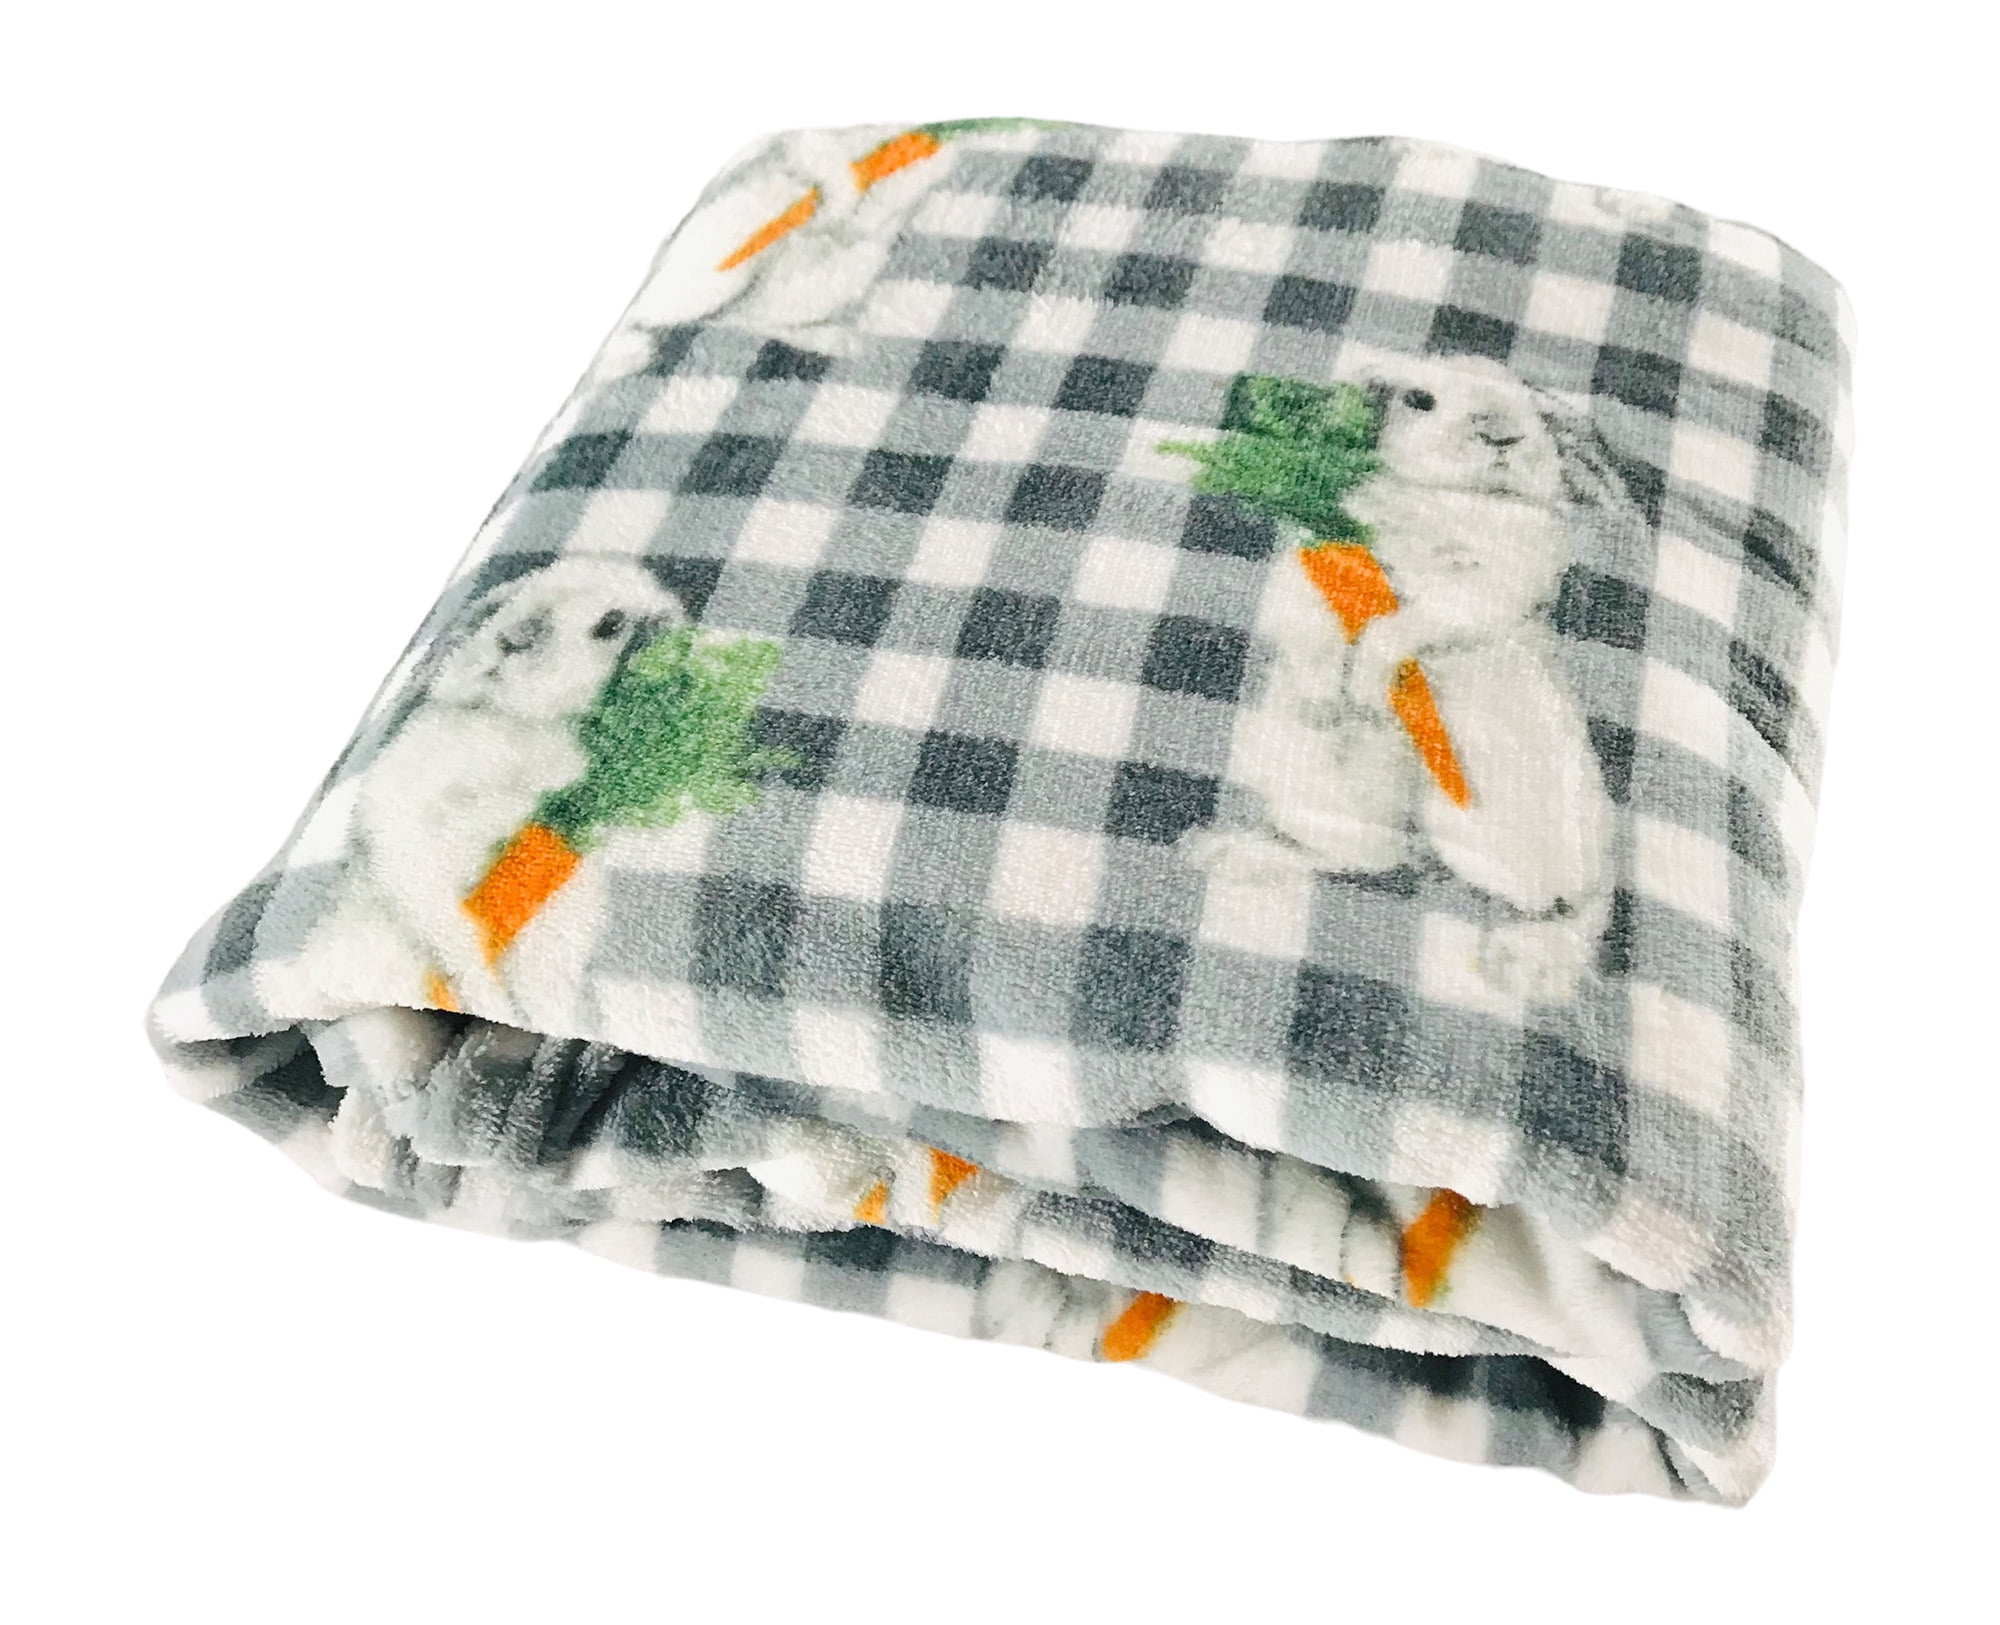 Happy Easter Sofa Travel Camping Blankets for All Seasons Flannel Bed Blankets Lightweight Plush & Warm Decorative Cute Chicken Baby Yellow 50x60inch Soft Fleece Throw Blanket for Couch